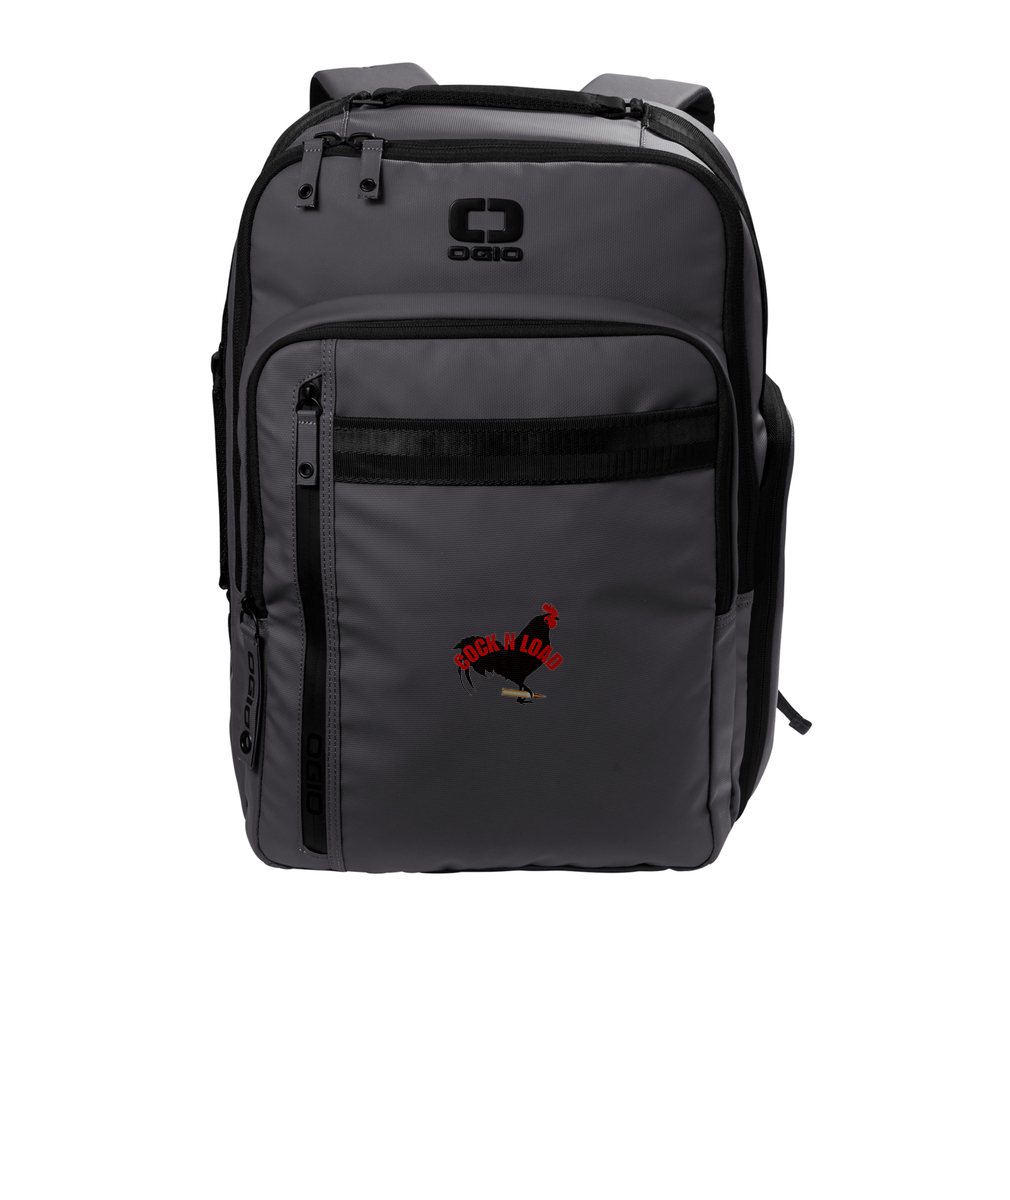 Cock n load 2 Embroidered OGIO Commuter XL Pack